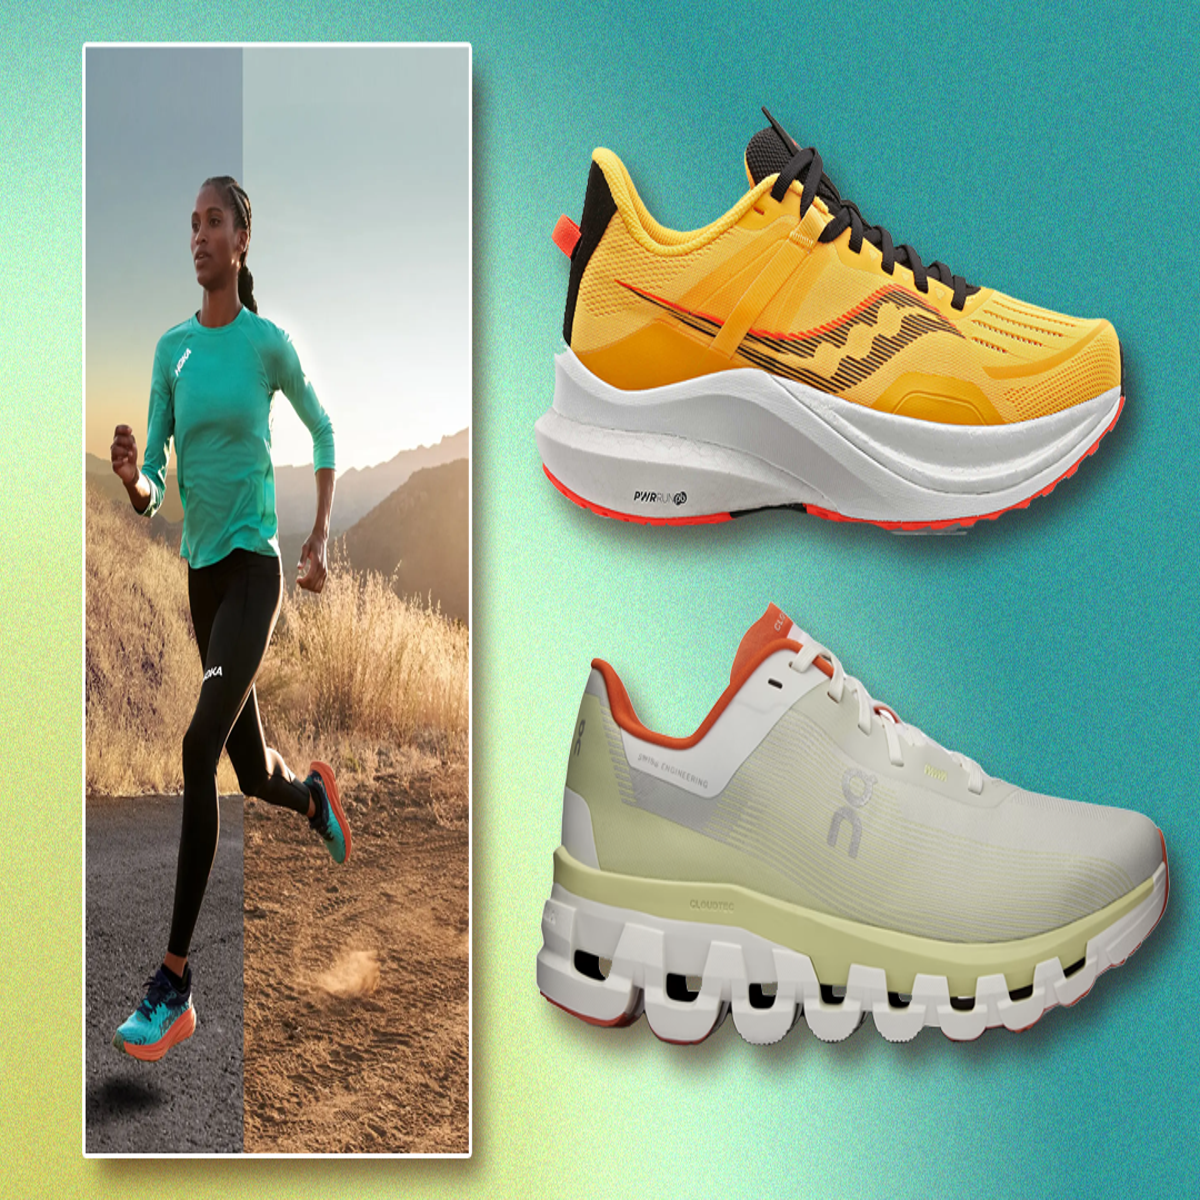 Do running shoes actually help you run faster and more efficiently?